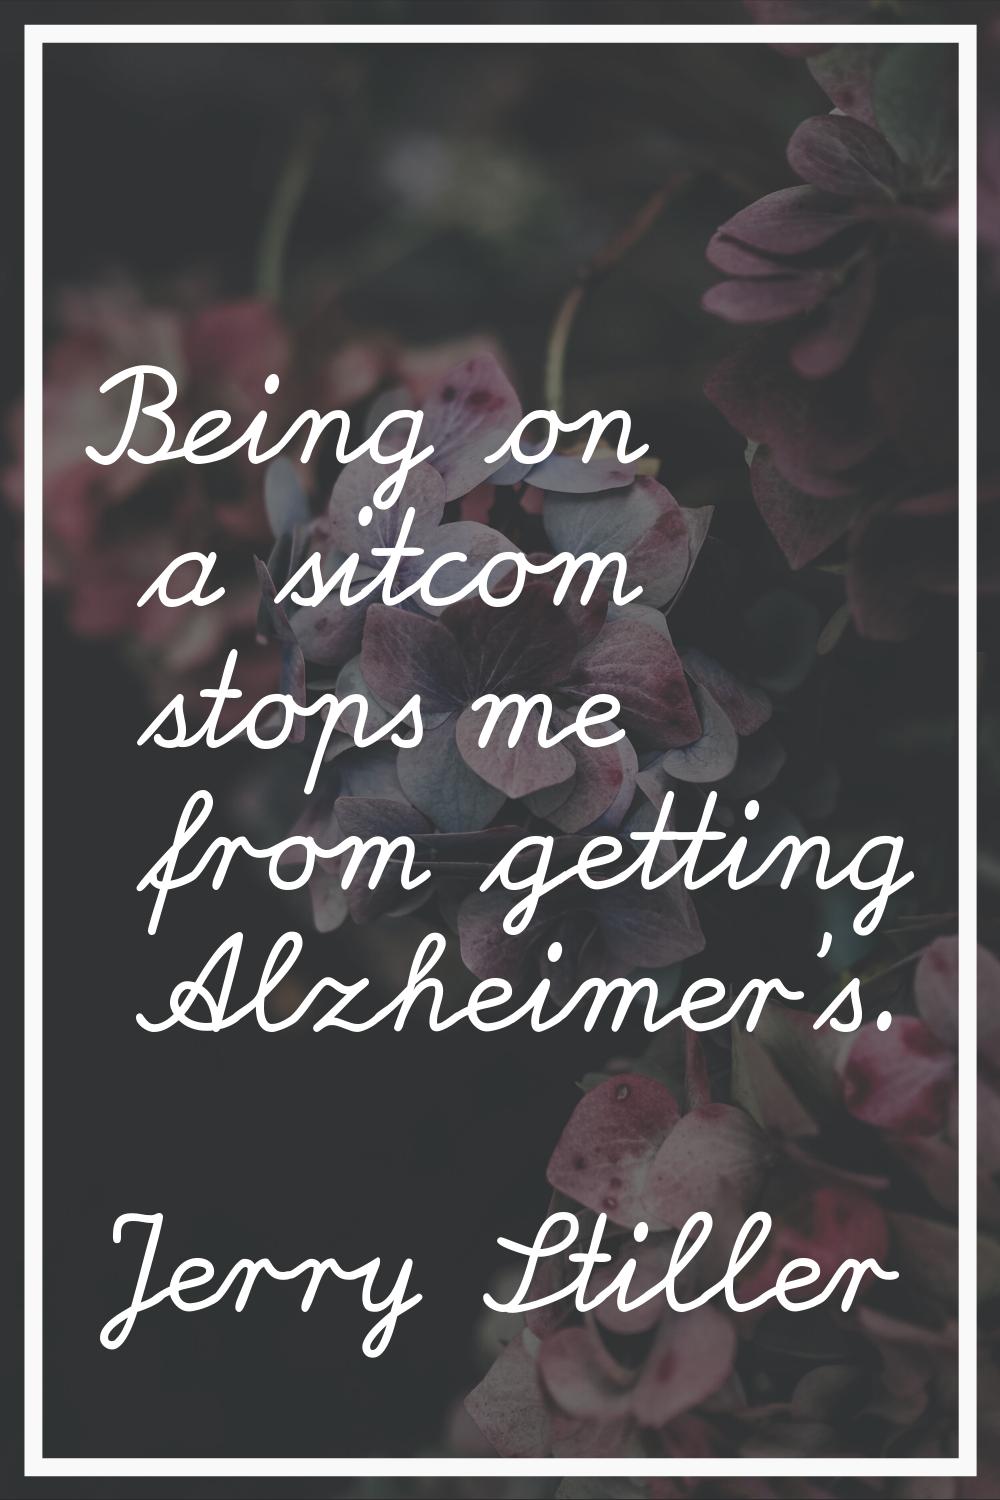 Being on a sitcom stops me from getting Alzheimer's.